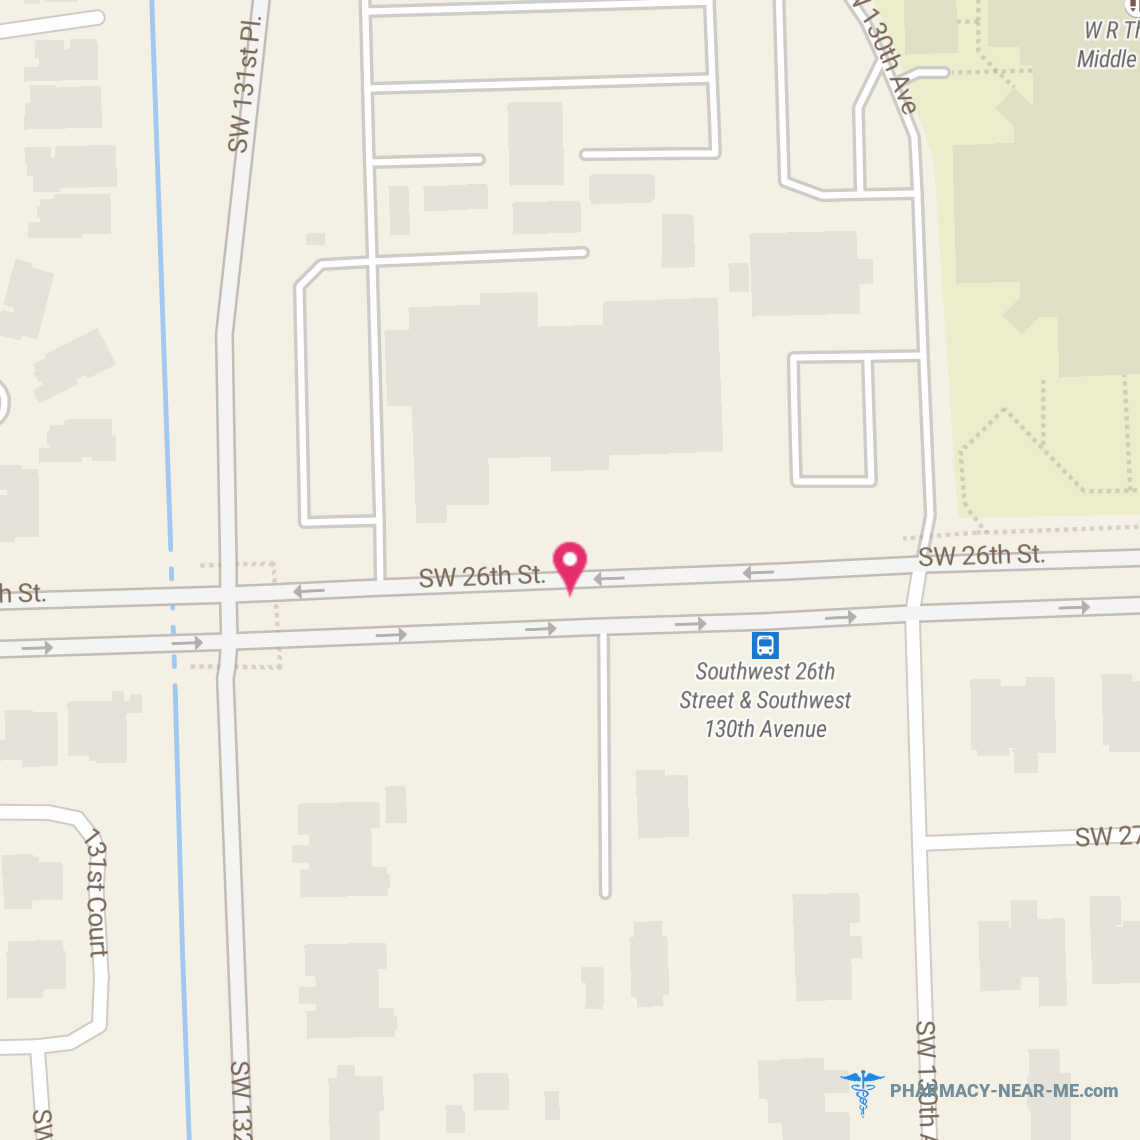 WALGREENS #05742 - Pharmacy Hours, Phone, Reviews & Information: 14190 SW 26th St, Miami, Florida 33175, United States